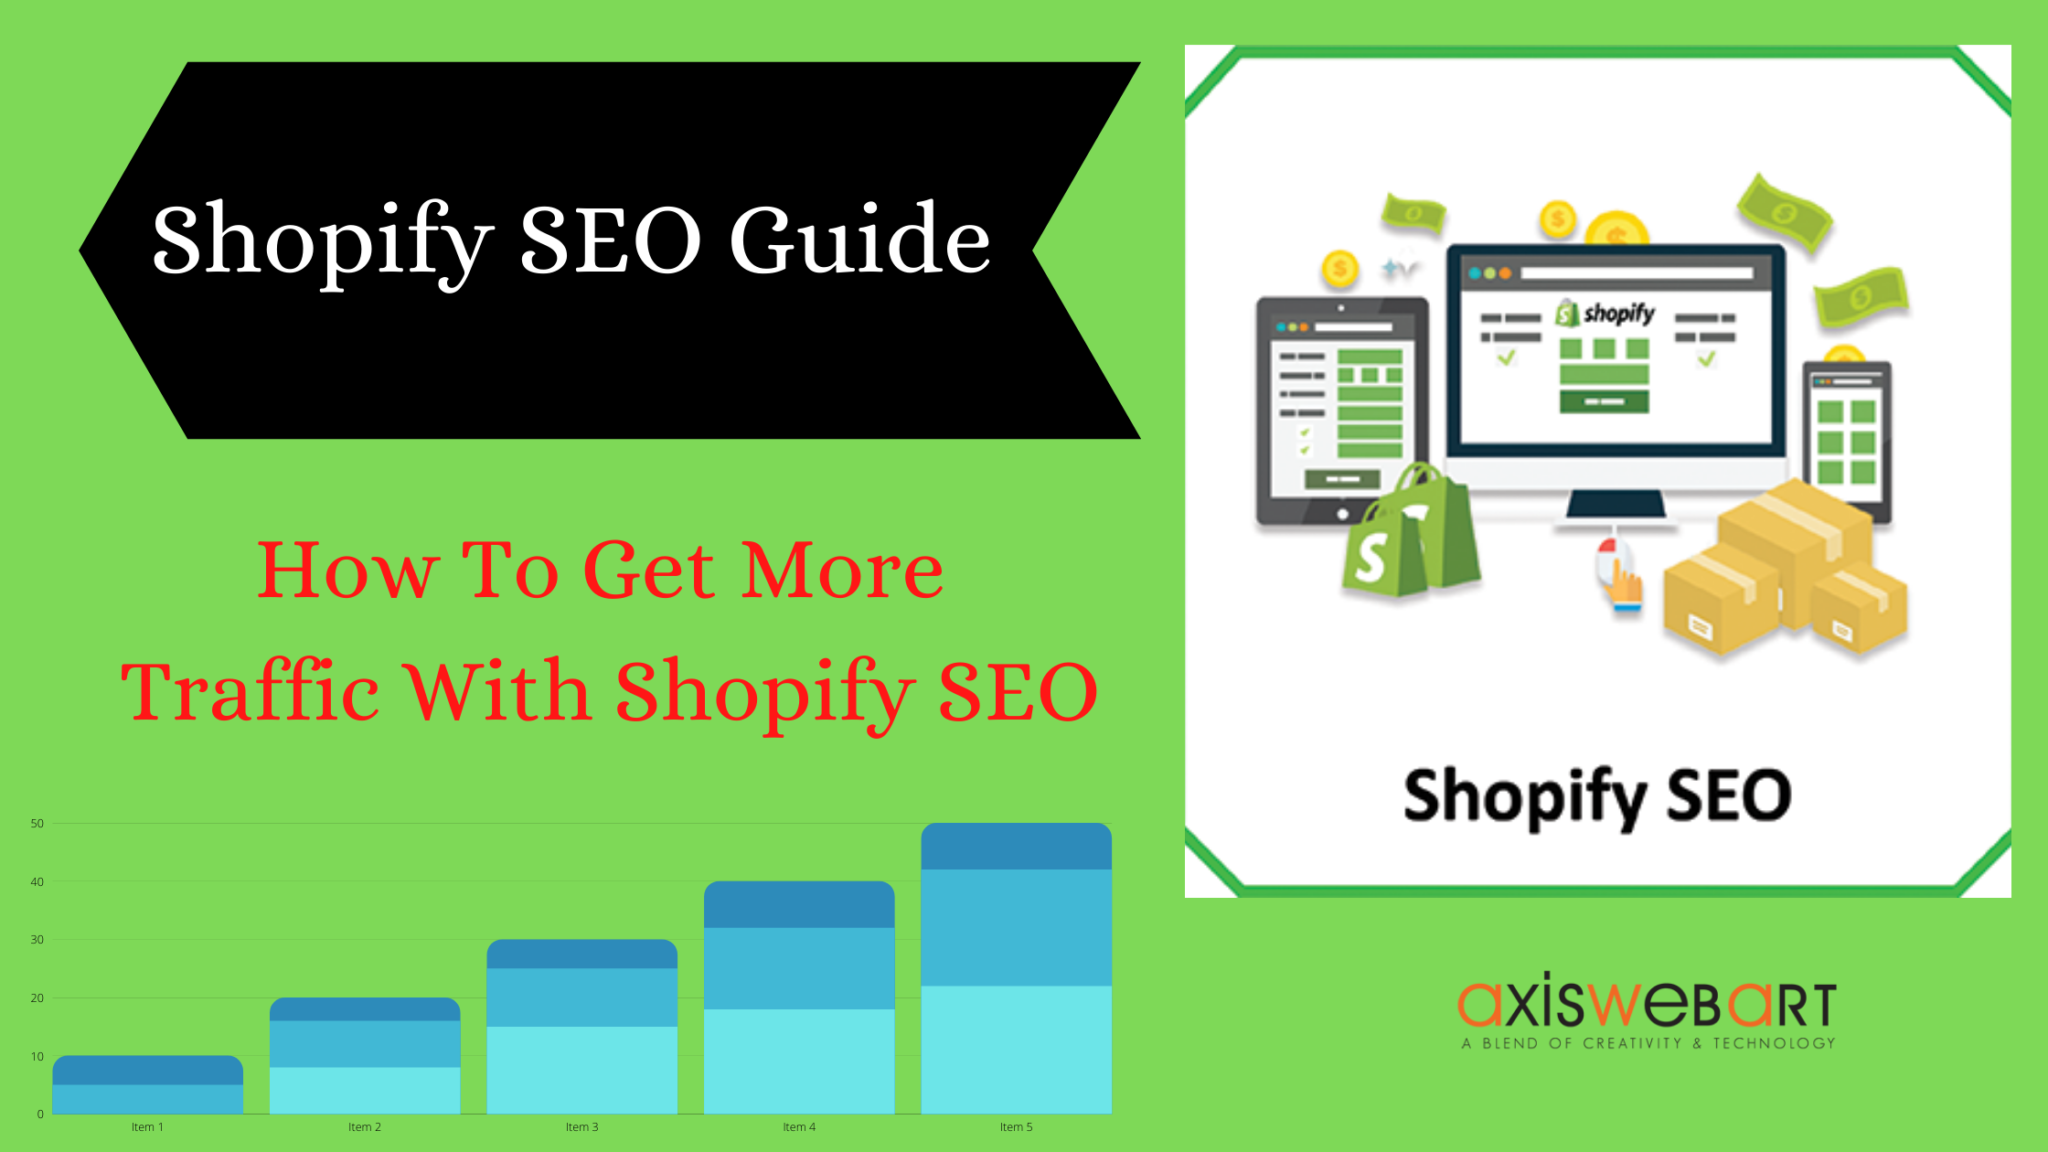 does shopify optimize images